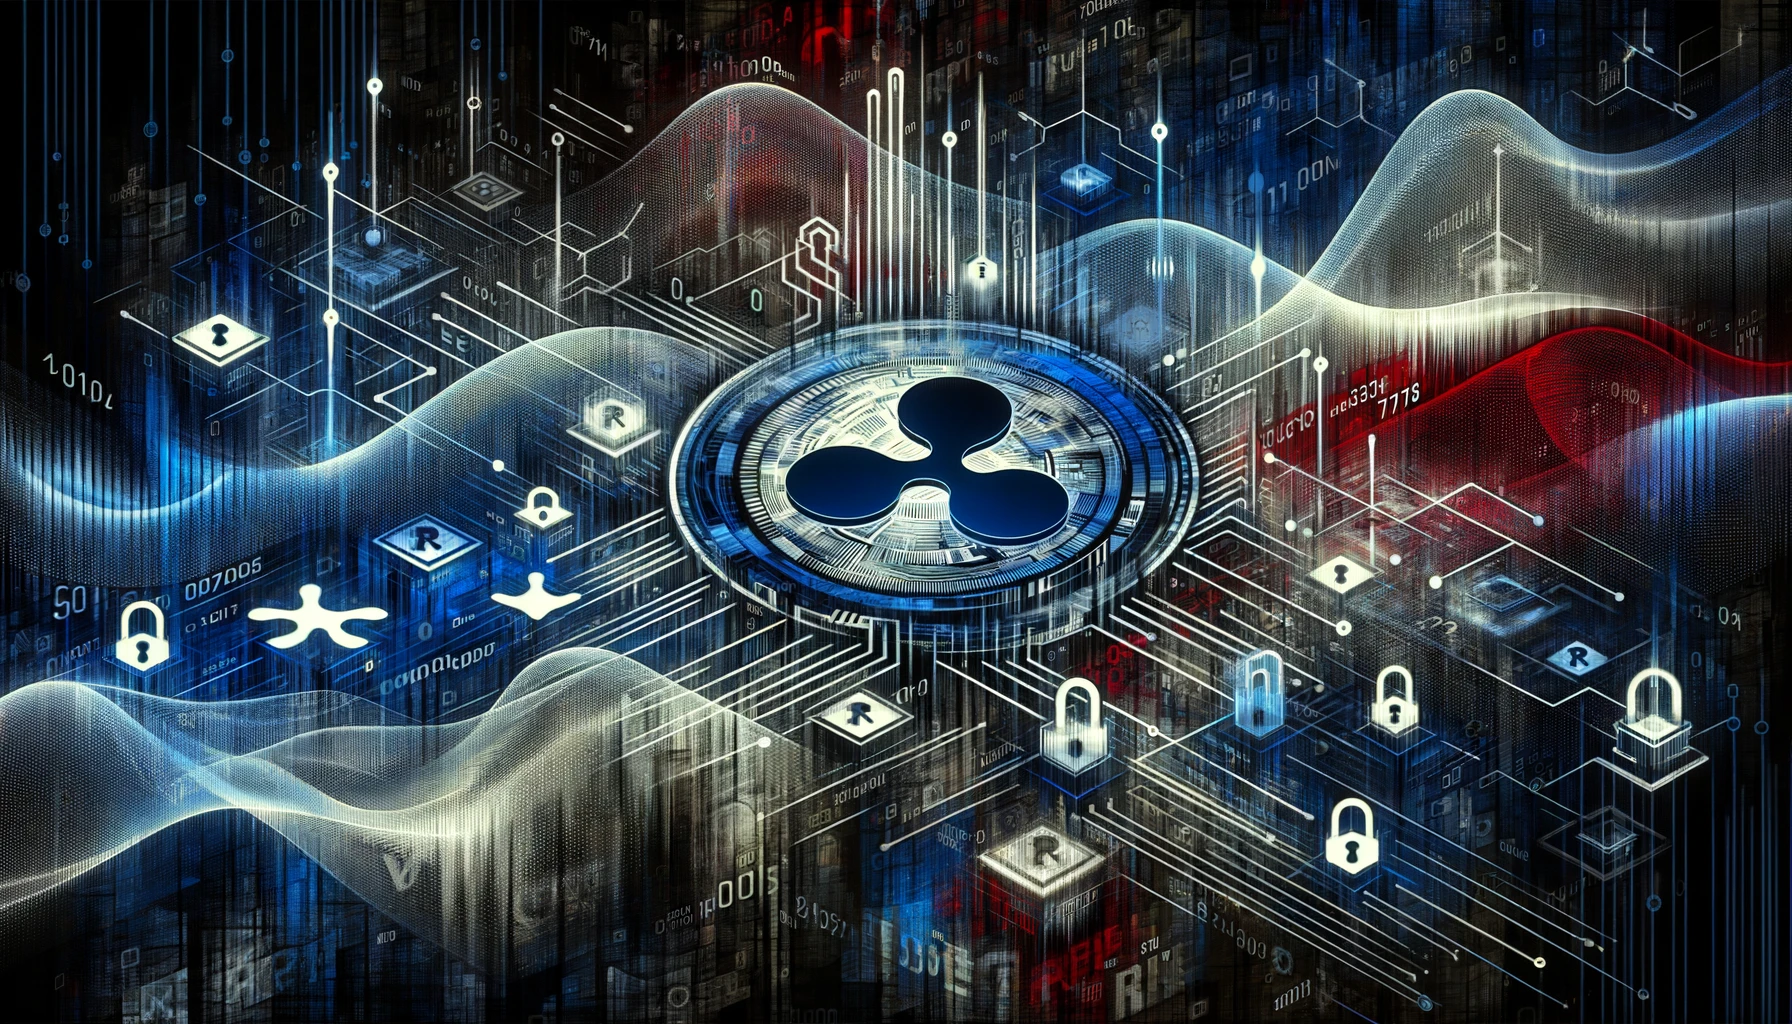 Ripple’s Security Breach: A Deep Dive into the $112.5M Heist